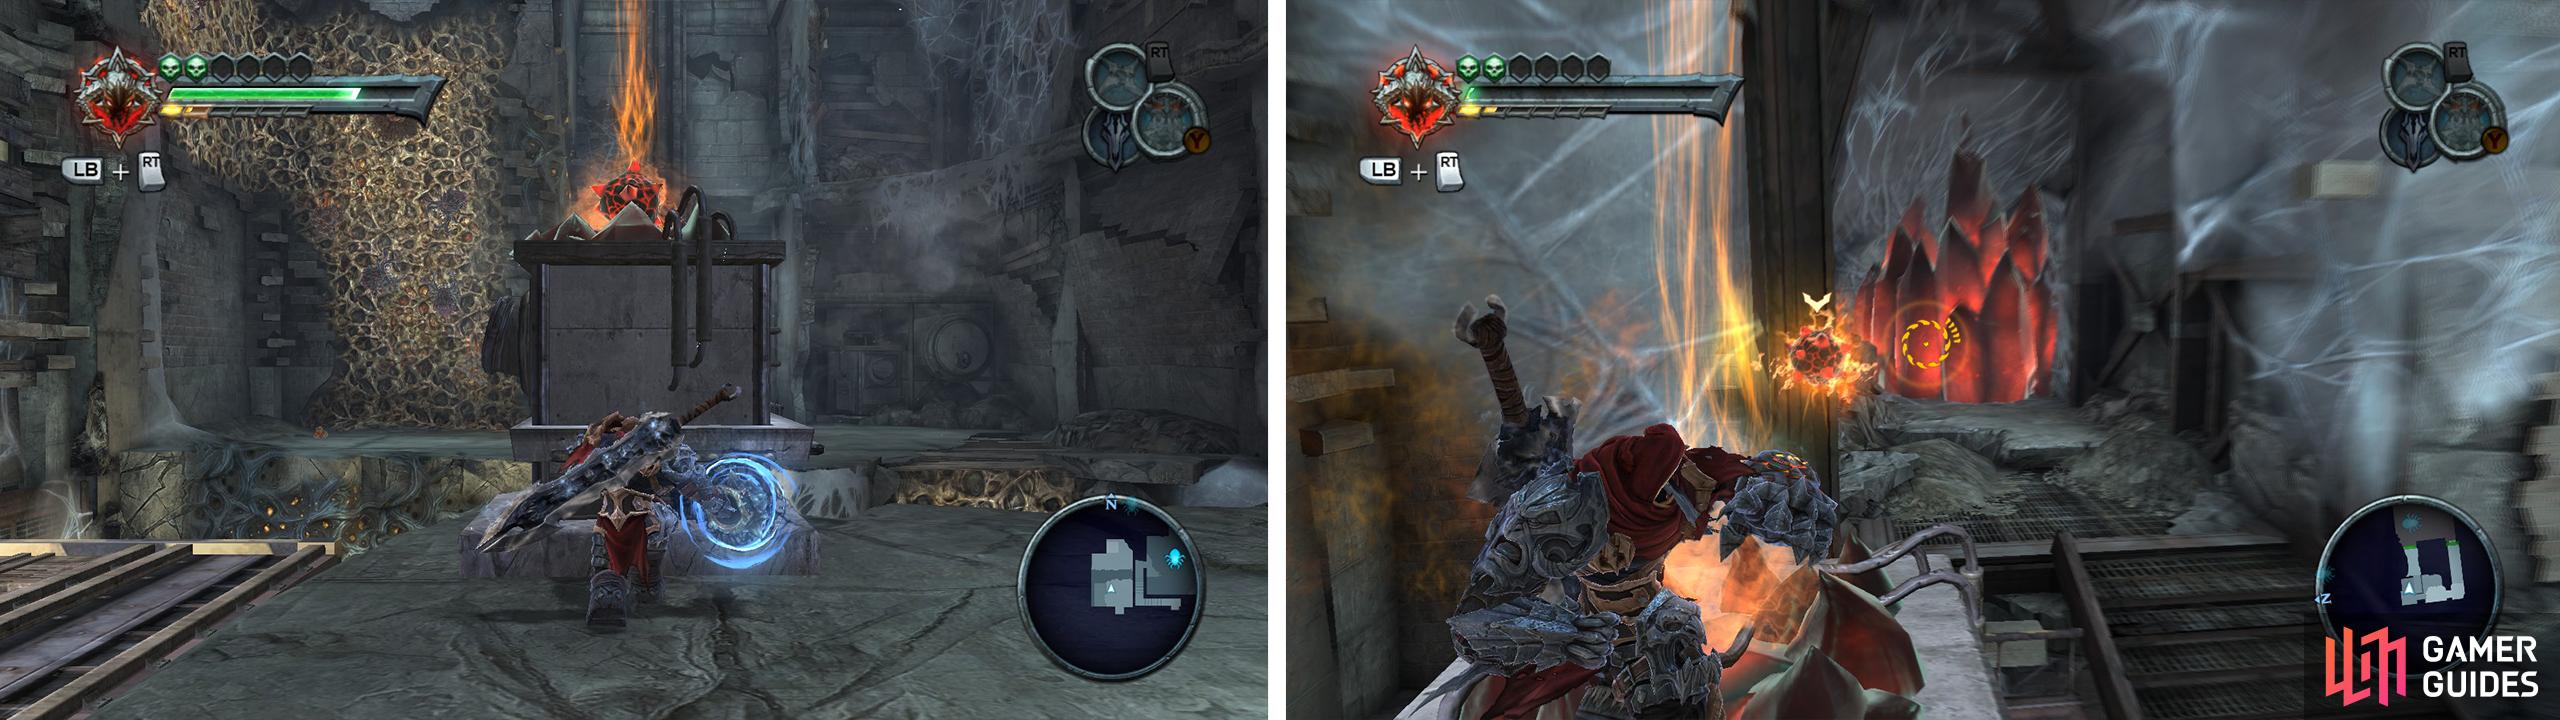 Punch the bomb block across the gap (left). When it reaches the top, use the bomb to blow up the red crystals (right).